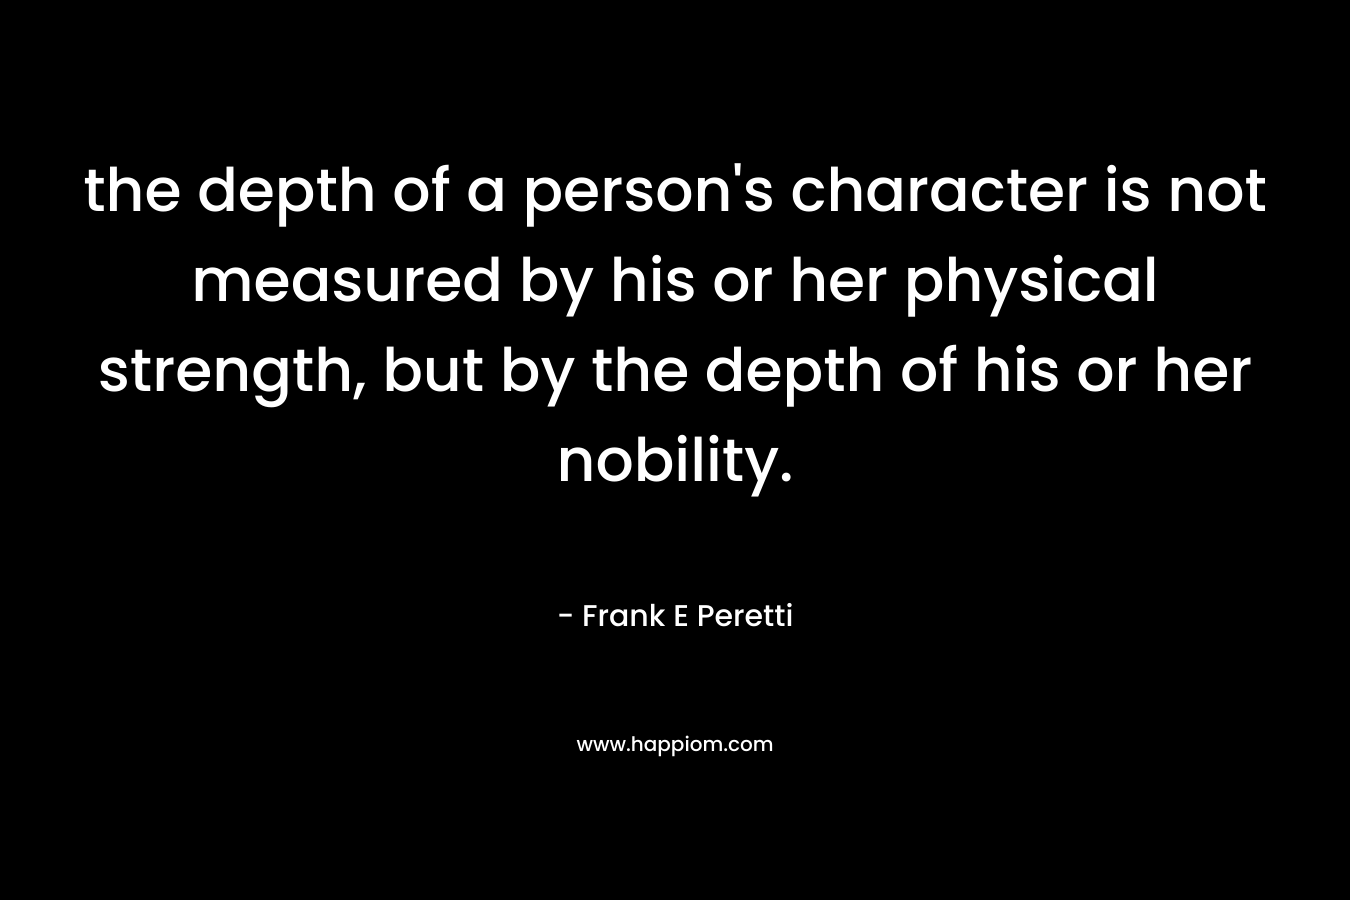 the depth of a person's character is not measured by his or her physical strength, but by the depth of his or her nobility.